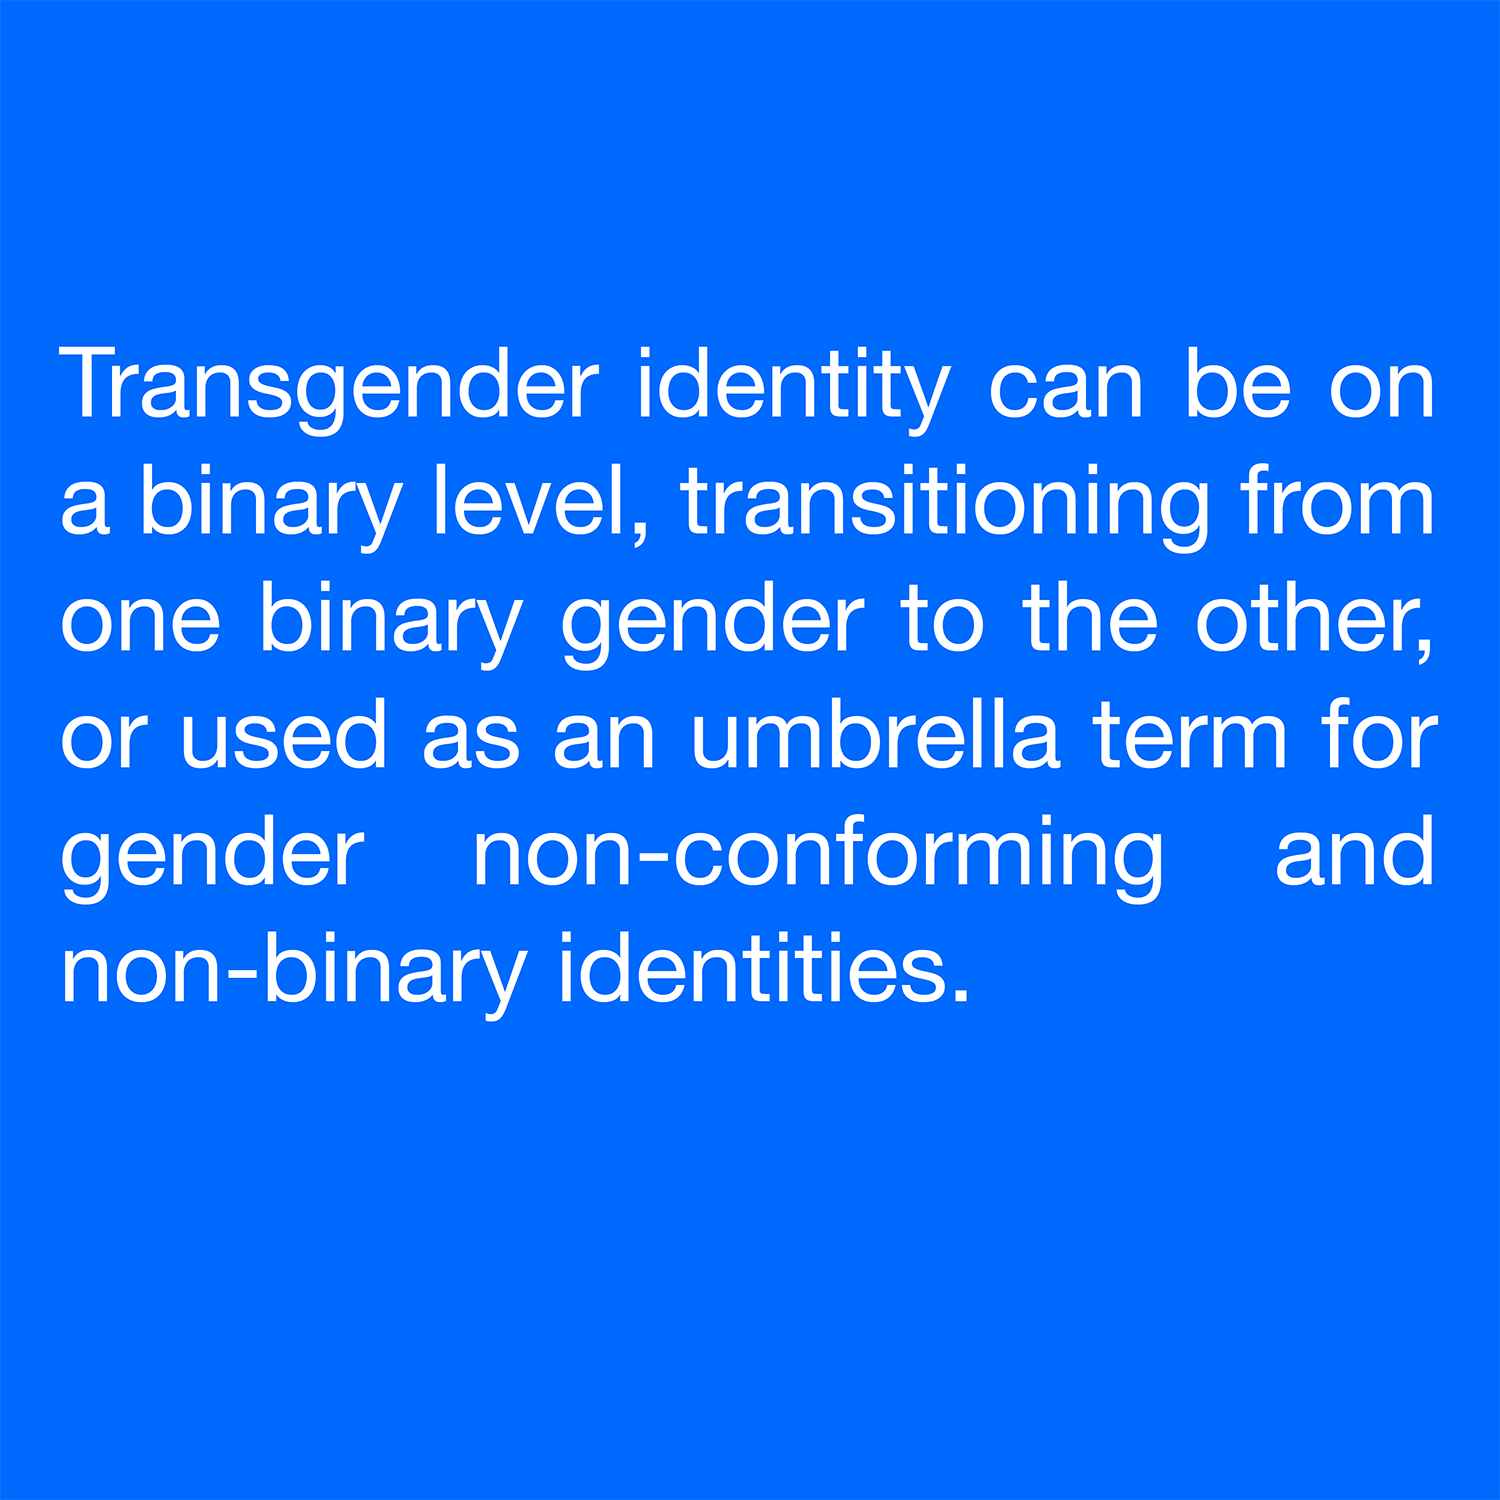  Transgender identity can be on a binary level, transitioning from one binary gender to the other, or used as an umbrella term for gender non-conforming and non-binary identities. 